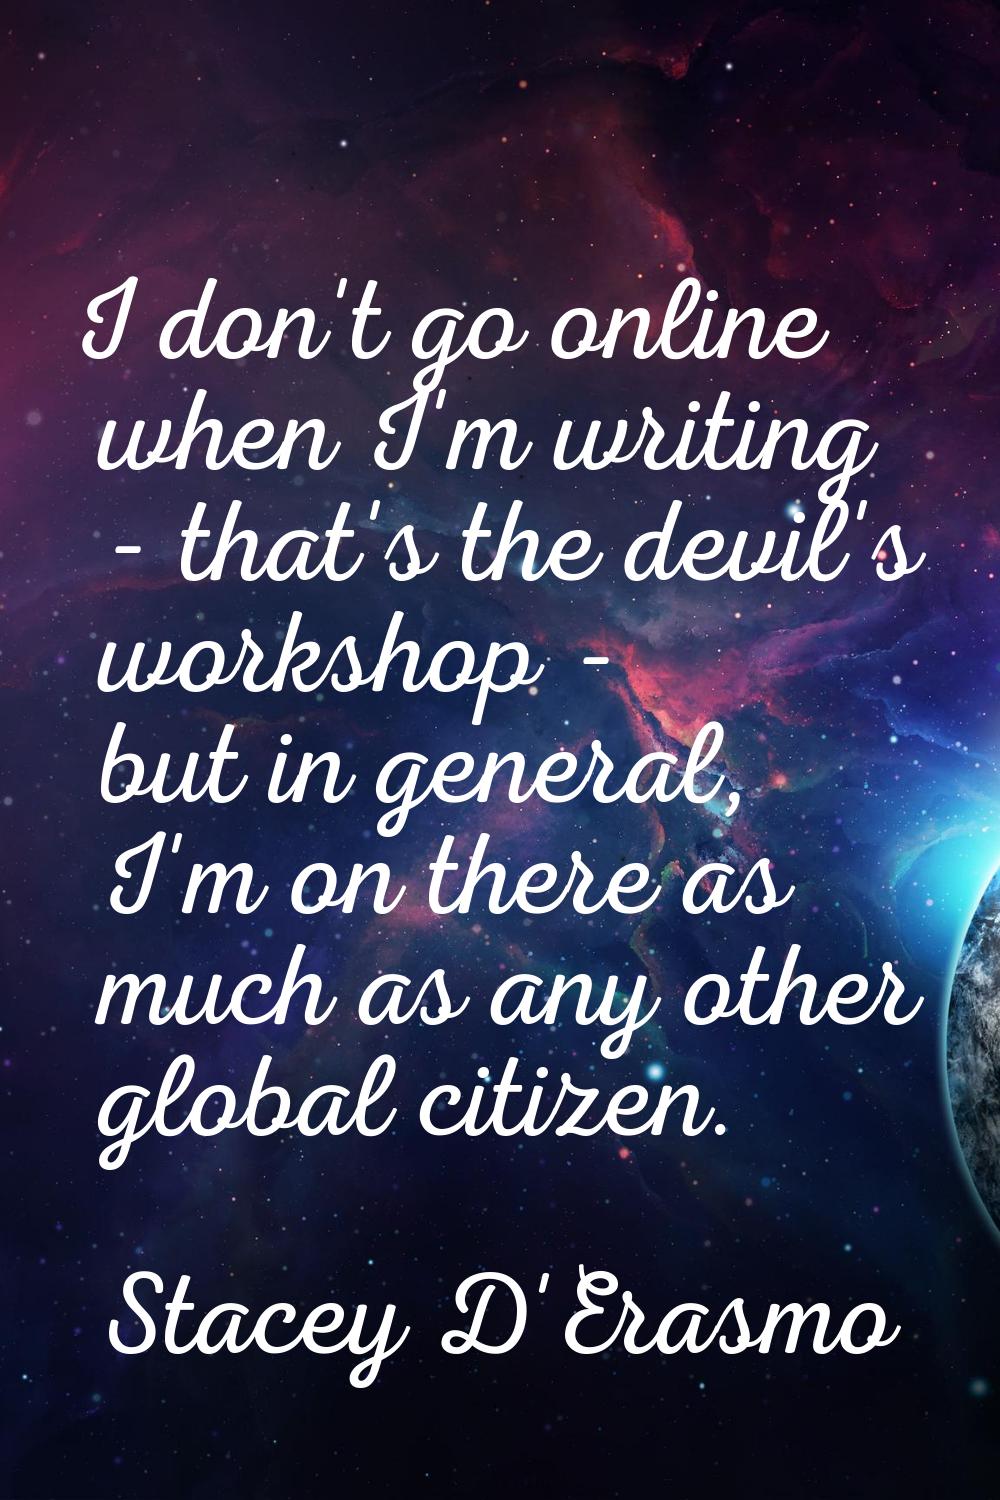 I don't go online when I'm writing - that's the devil's workshop - but in general, I'm on there as 